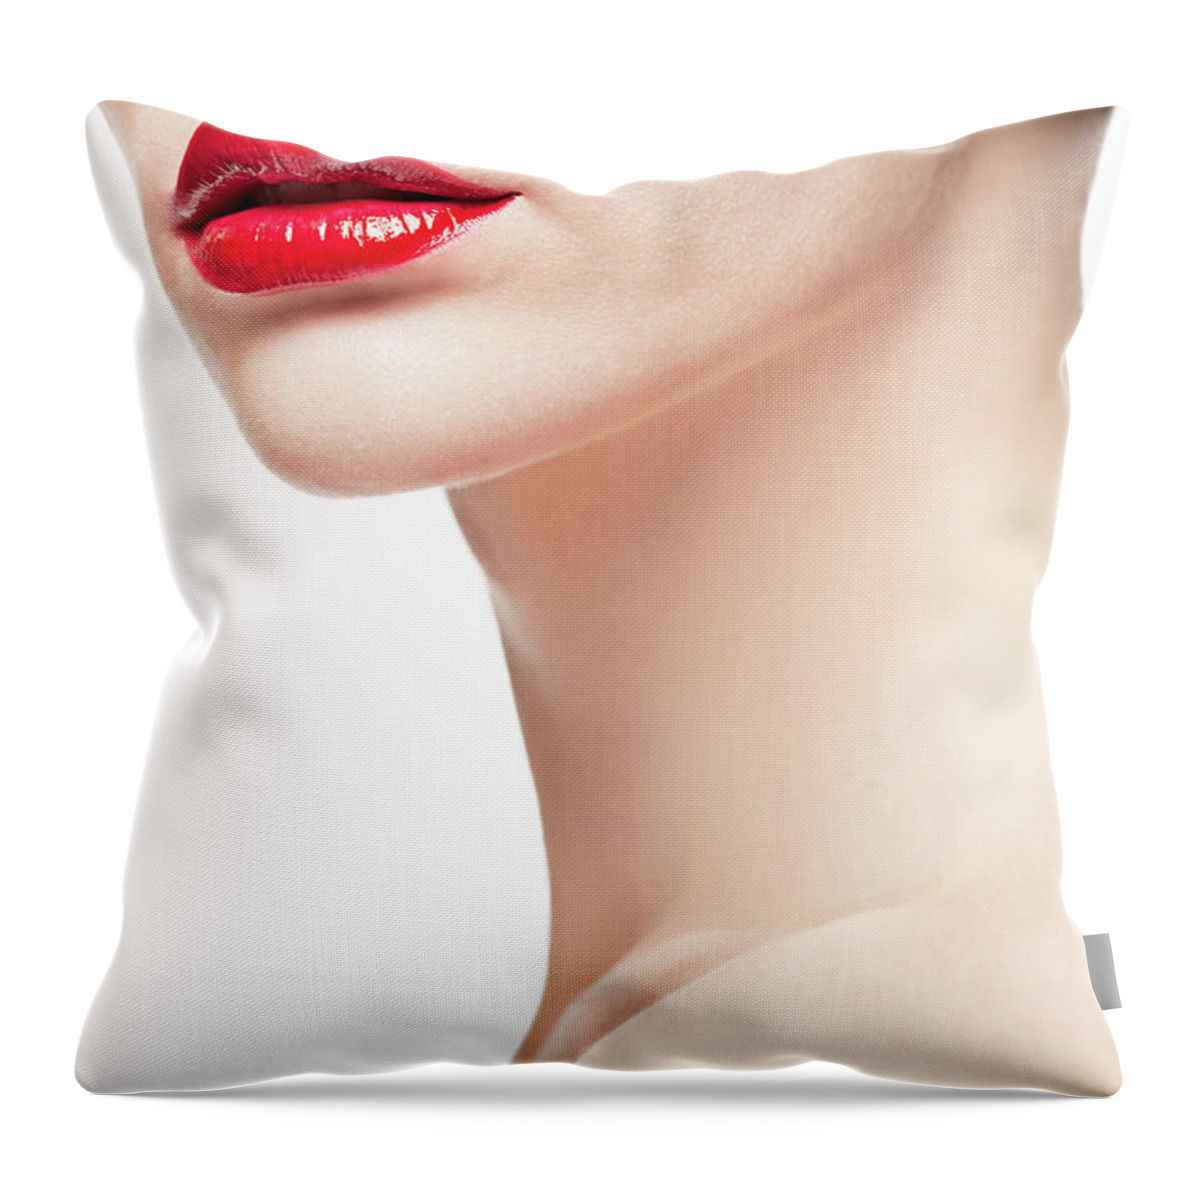 Cool Attitude Throw Pillow featuring the photograph Beautiful Lips by Ultramarinfoto